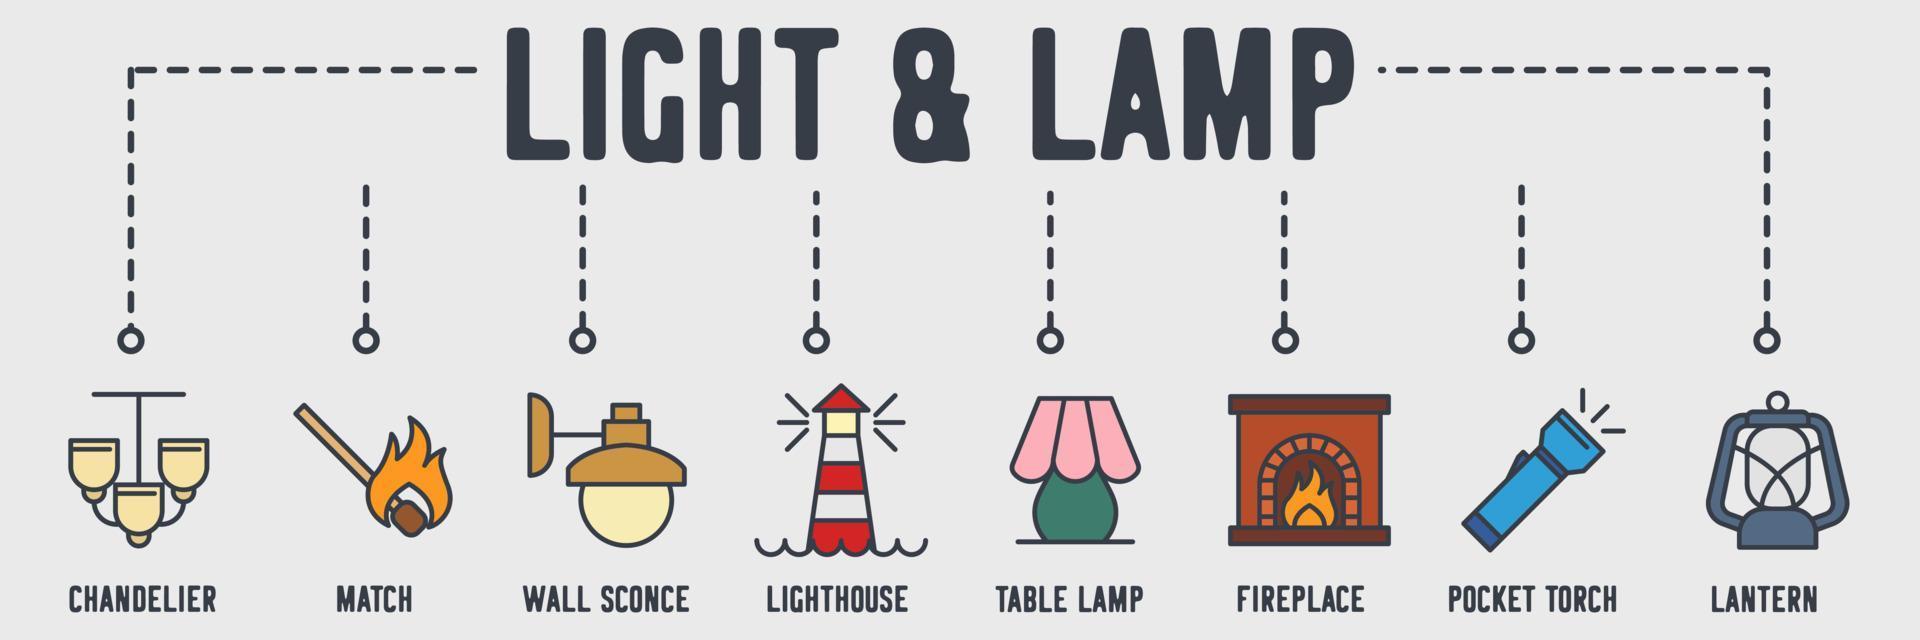 Lighting and Lamp banner web icon. chandelier, match, wall sconce, lighthouse, table lamp, fireplace, pocket torch, lantern vector illustration concept.